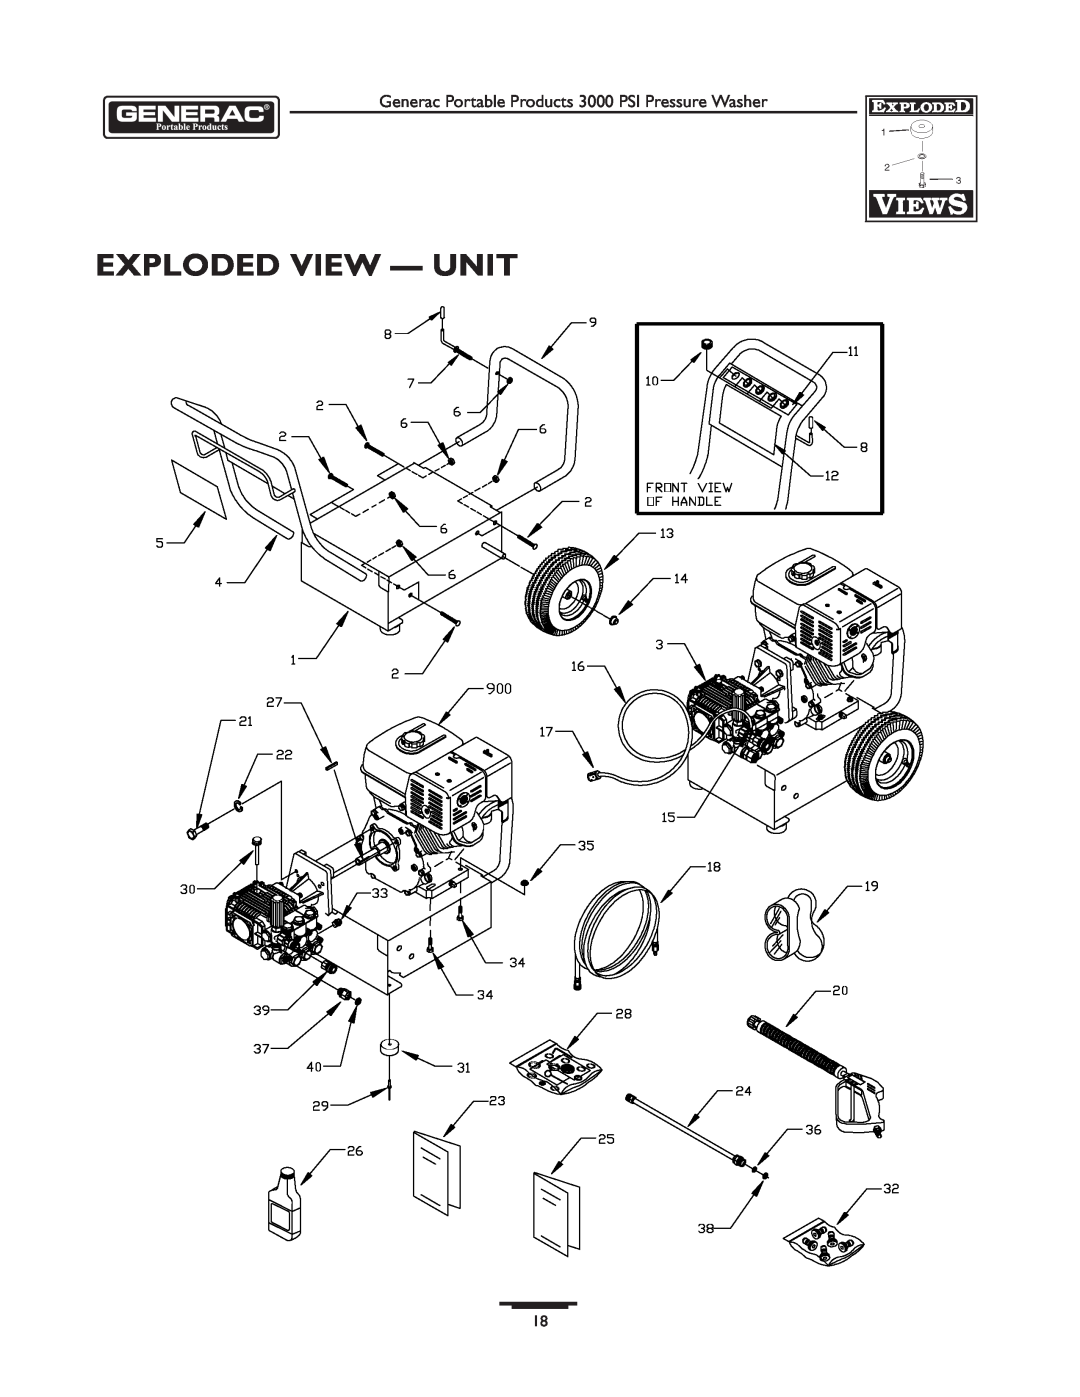 Briggs & Stratton 1418-2 owner manual Exploded View - Unit, Generac Portable Products 3000 PSI Pressure Washer 